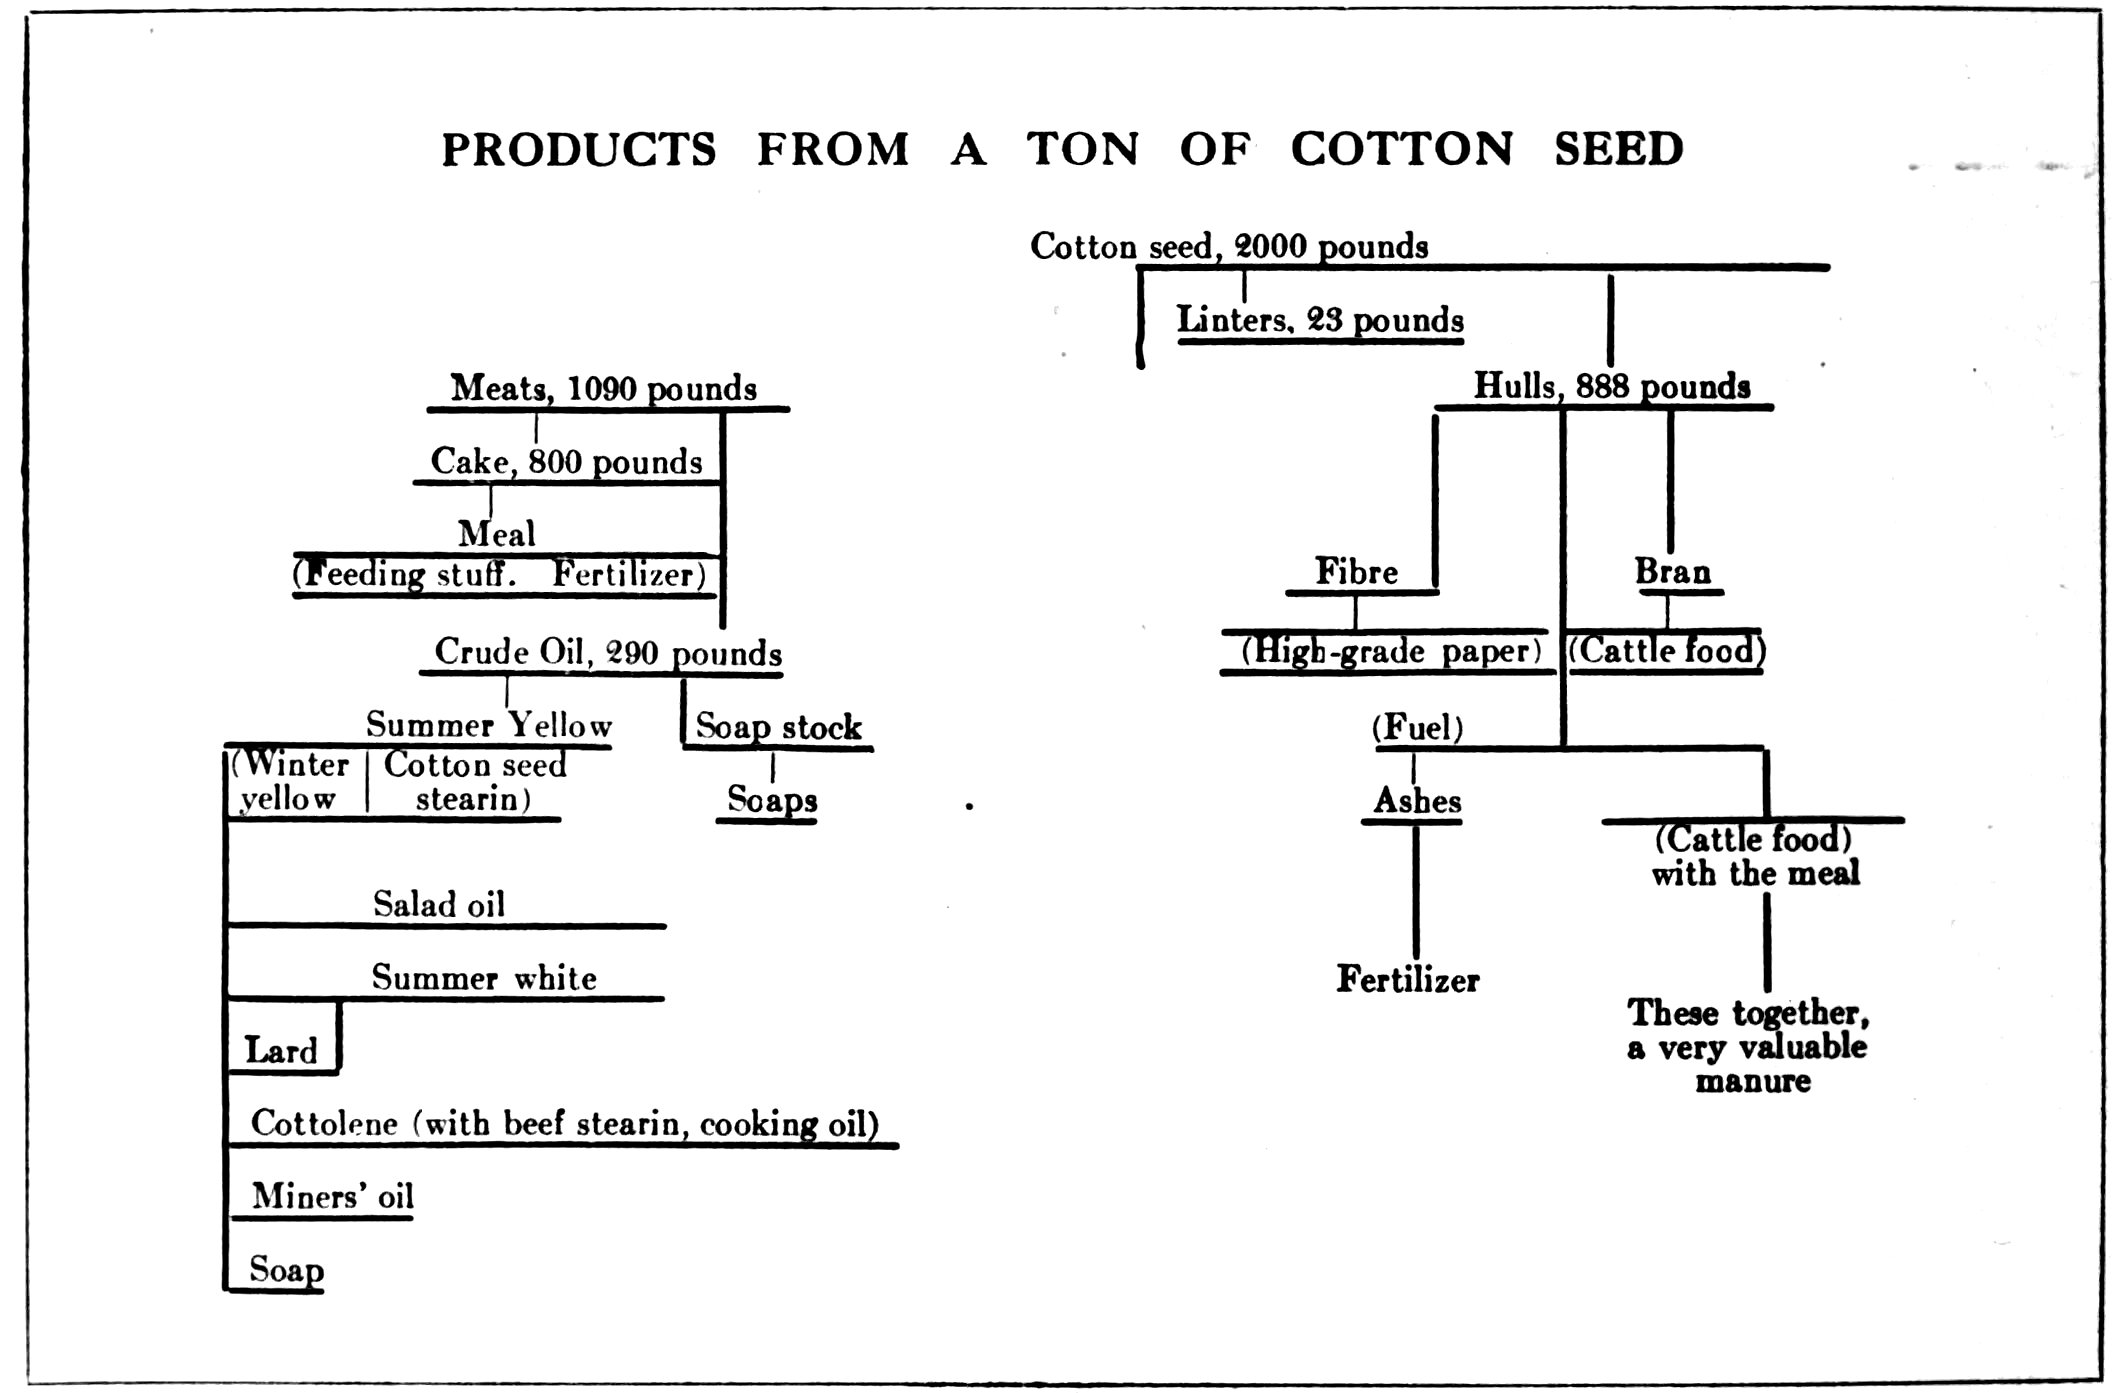 PRODUCTS FROM A TON OF COTTON SEED